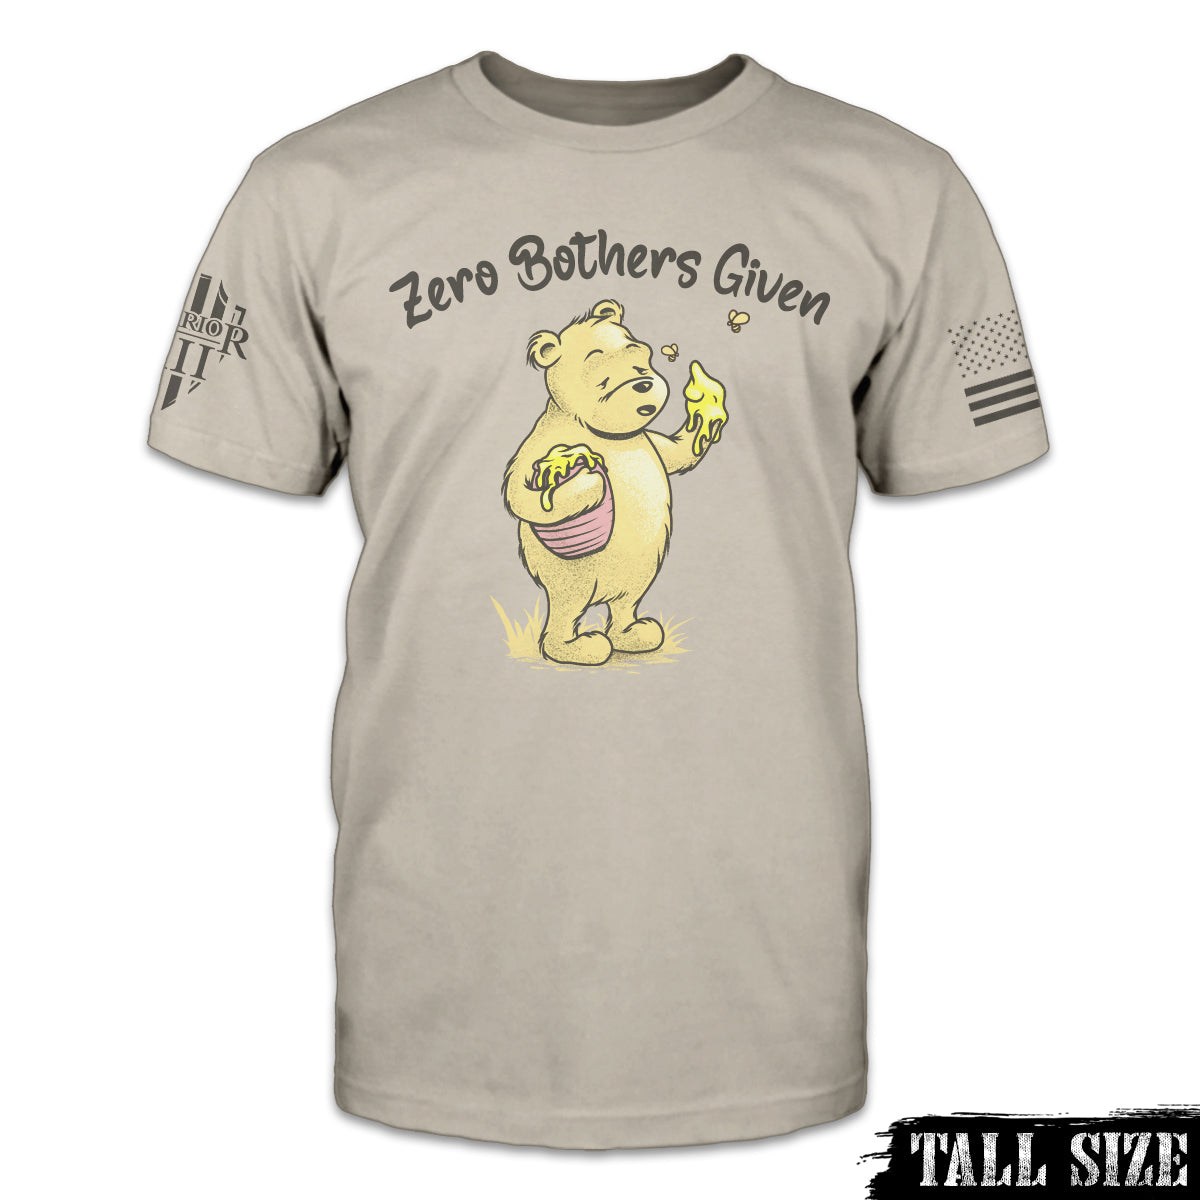 Zero Bothers Given - Tall Size